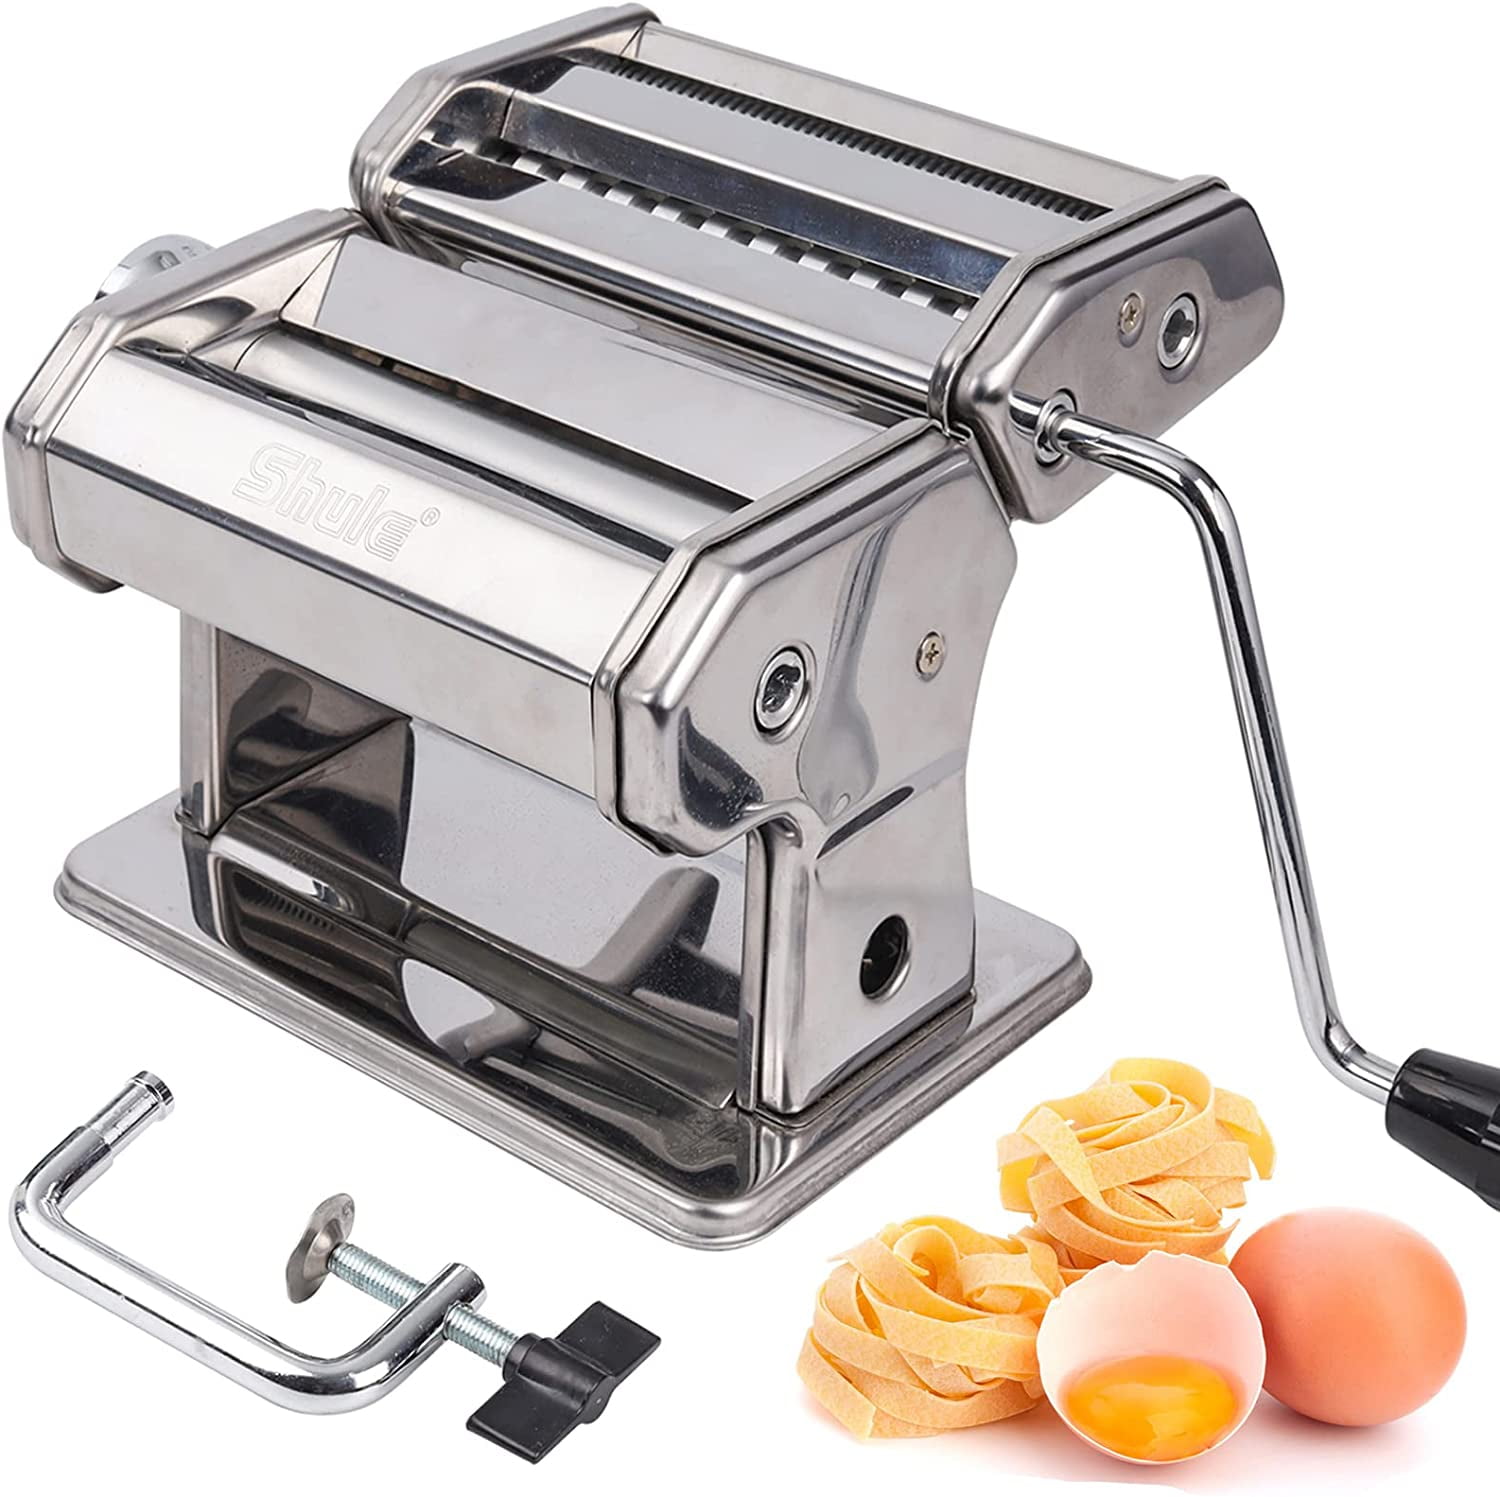  Pasta Maker,Tooluck 150 Pasta Roller Pasta Machine With 2 In 1 Dough  Cutter And 7 Adjustable Thickness Setting For Homemade Pasta,Spaghetti,  Fettuccini, Lasagna Or Dumpling Skins,Best Kitchen Gift Set : Home